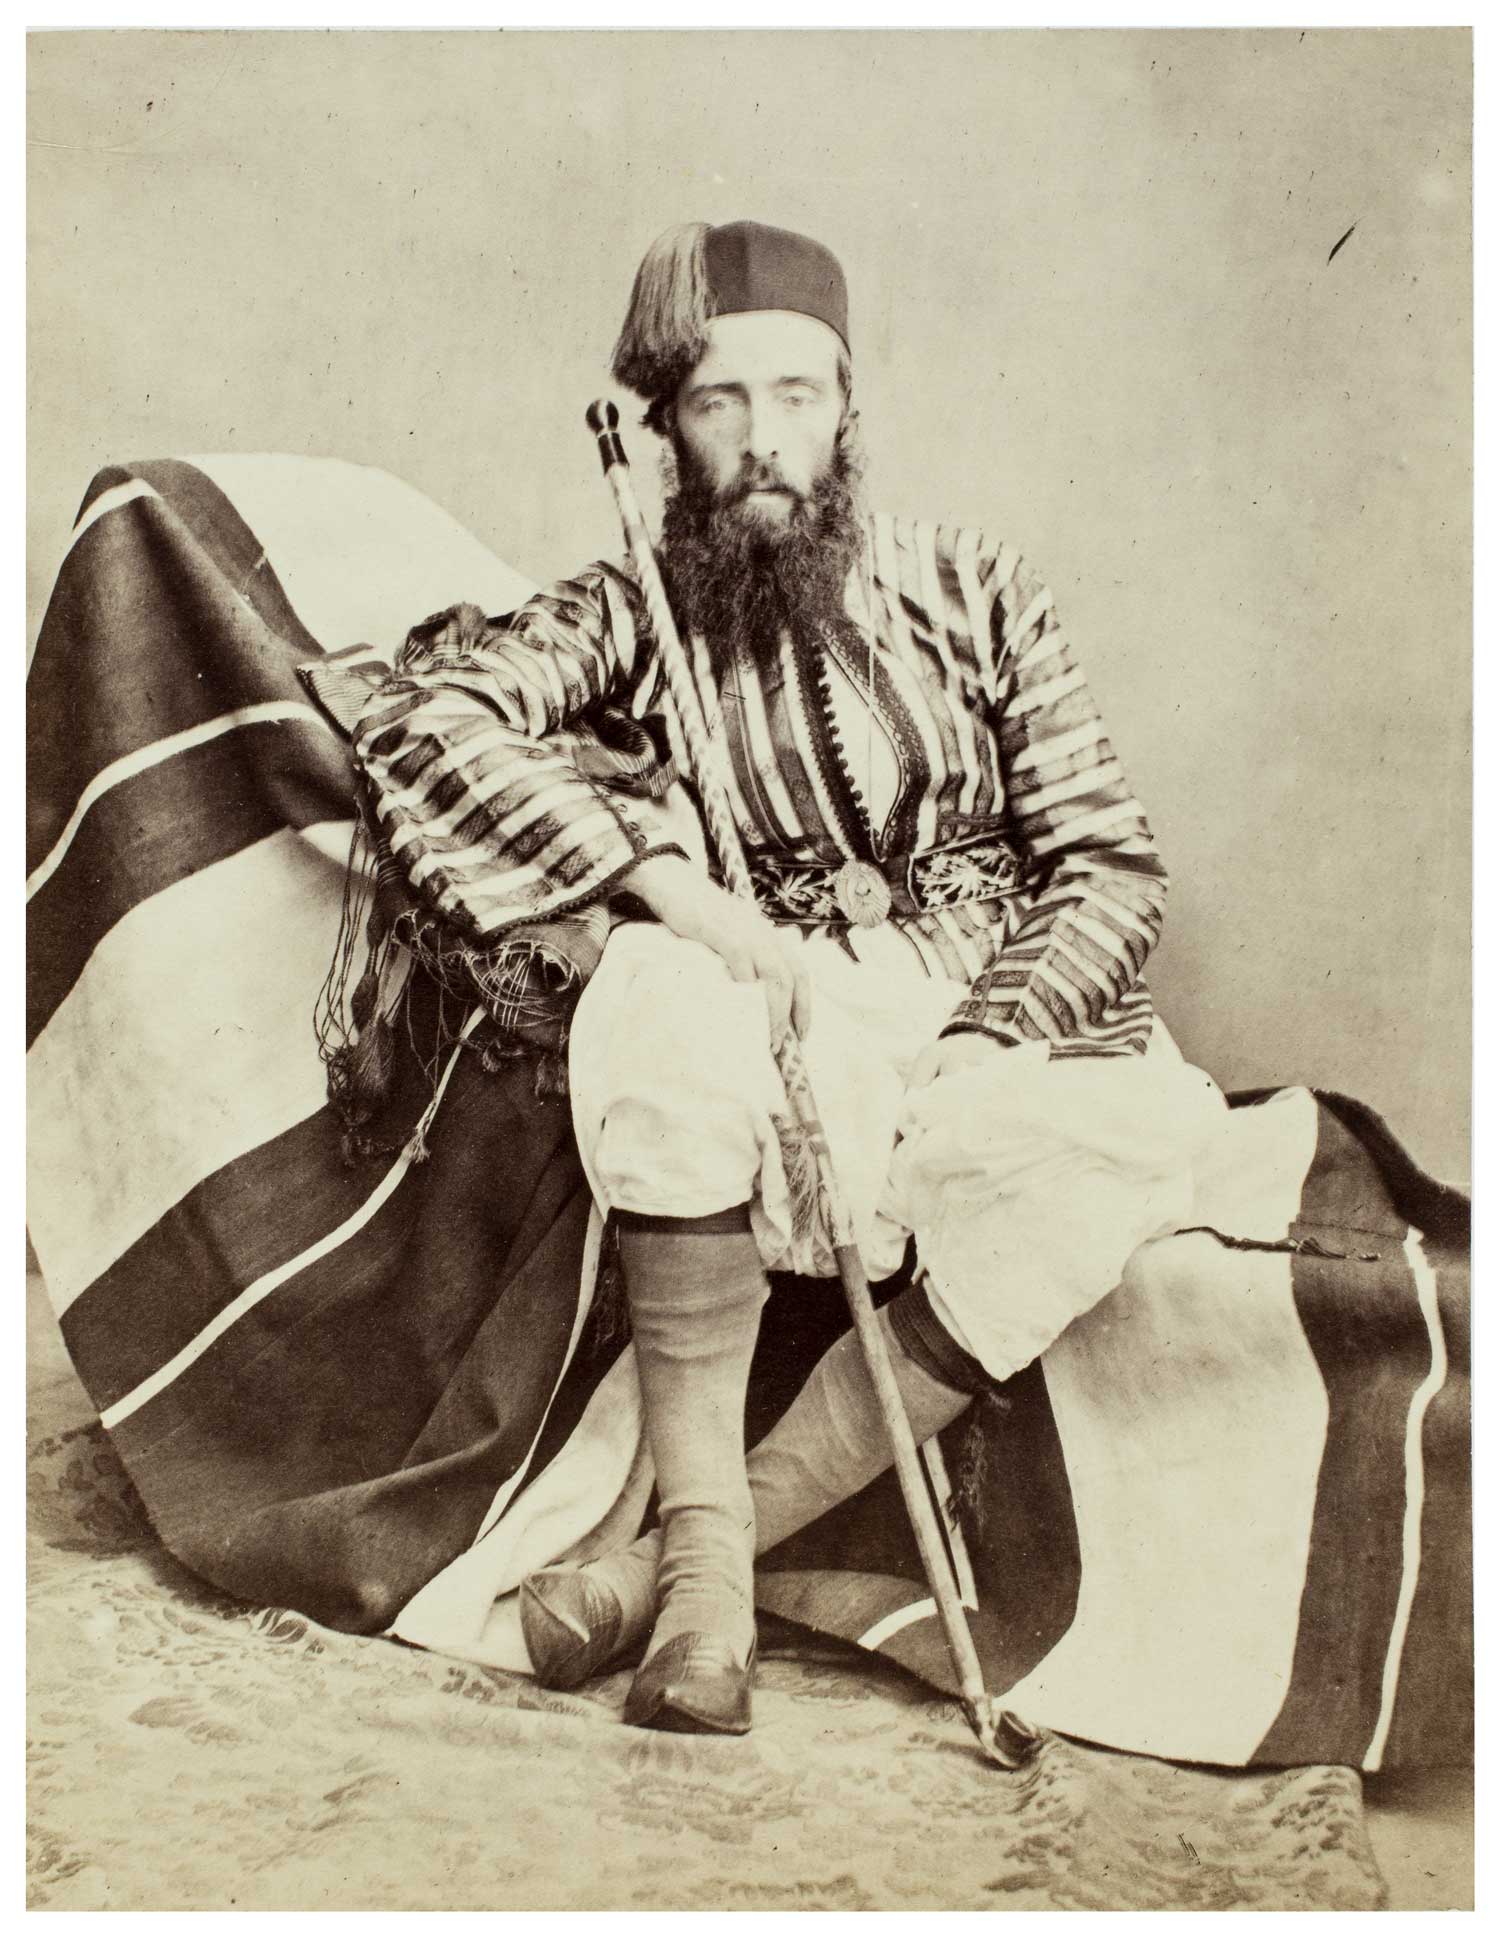 Francis Frith Frontispiece: Portrait of Turkish Summer Costume 1858 Photograph, lbumen print photograph on mount 6 1/4 x 9 in Mount Holyoke College Art Museum MH 1982.10.1.1 Gift of Susan B. Matheson (Class of 1968)